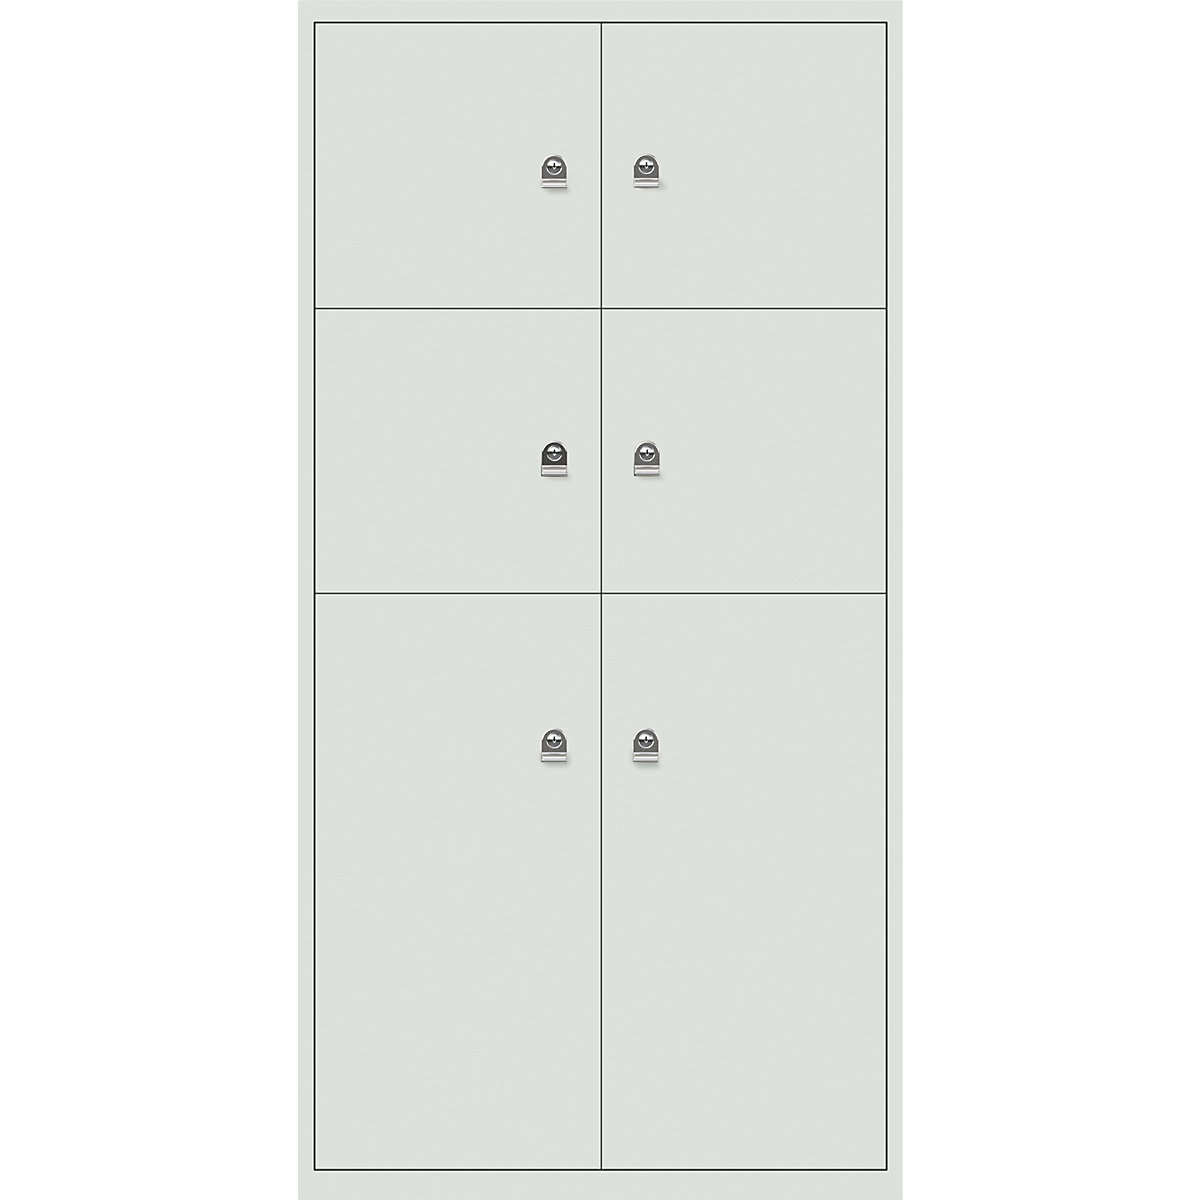 LateralFile™ lodge – BISLEY, with 6 lockable compartments, height 4 x 375 mm, 2 x 755 mm, portland-32